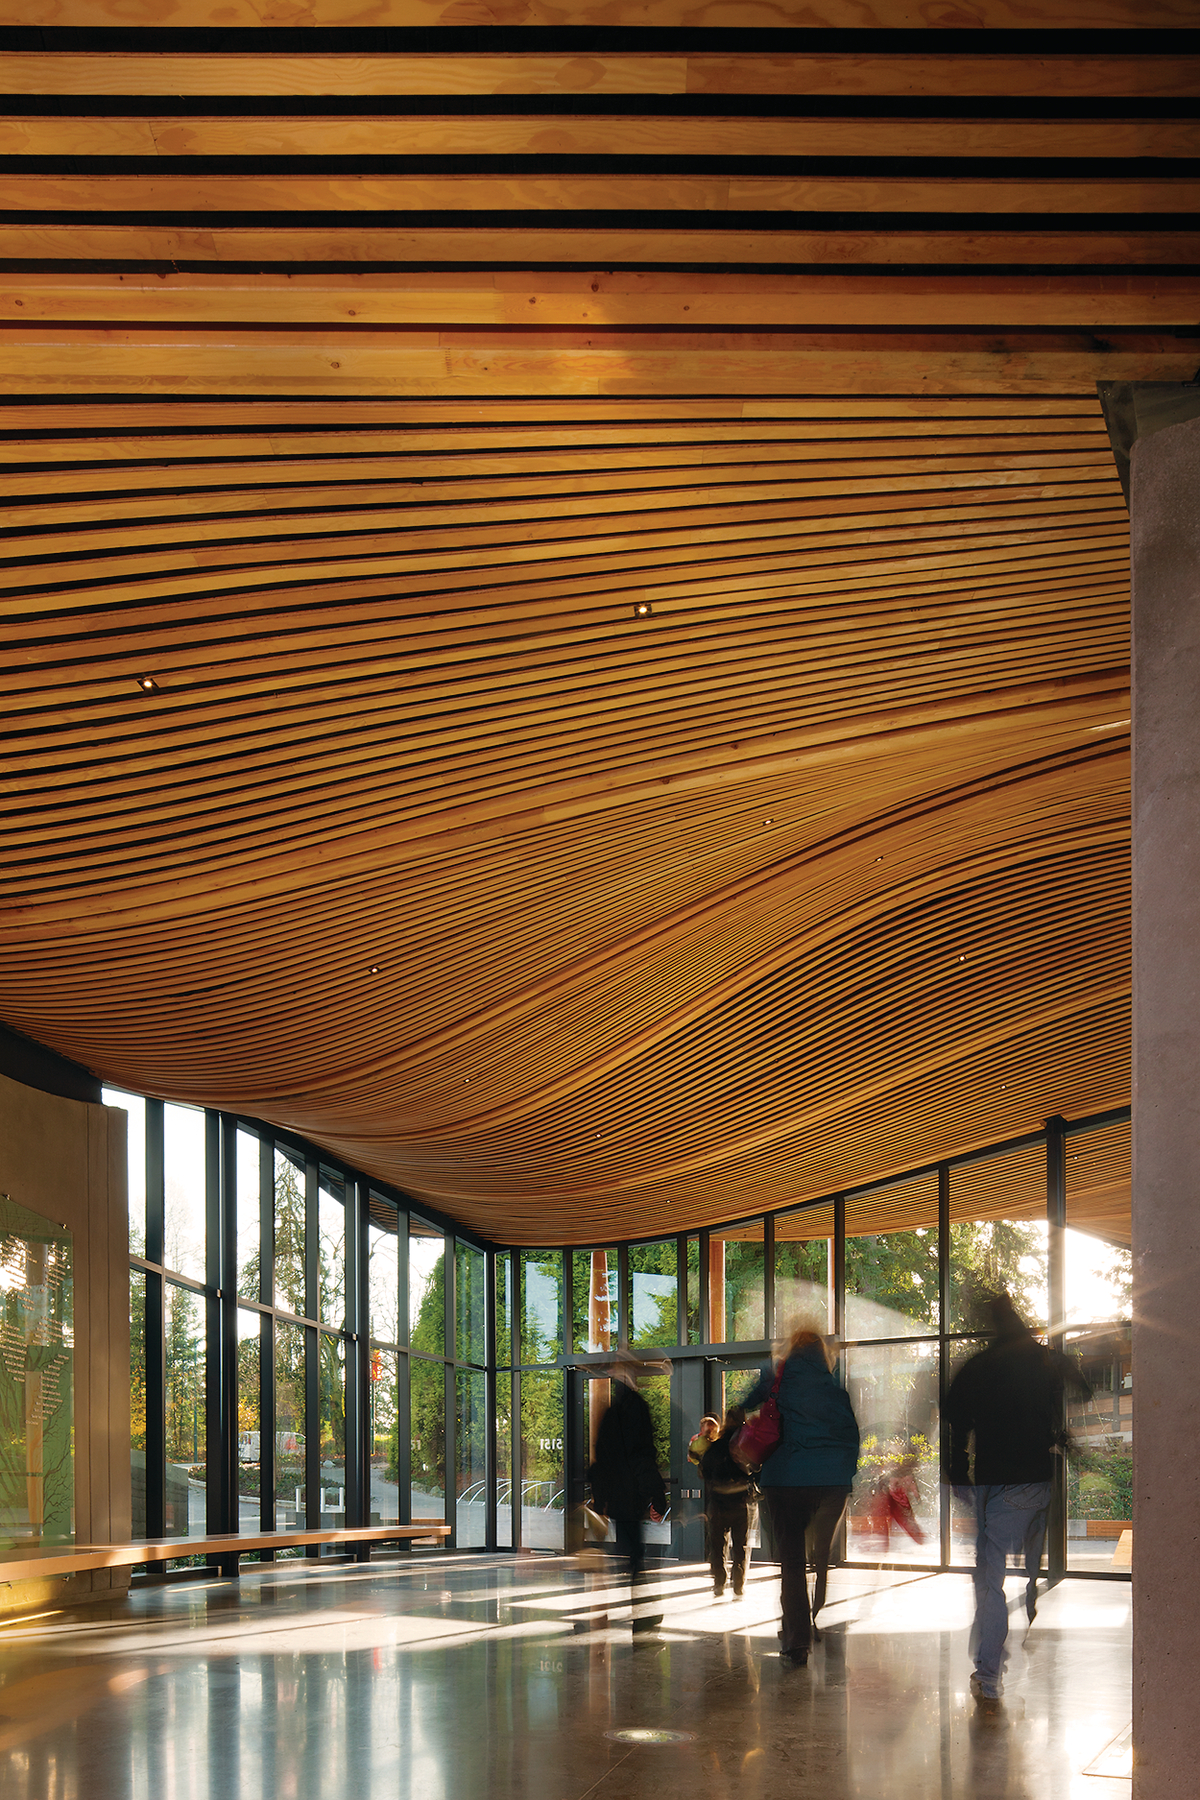 Internal daytime view of occupied VanDusen Botanical Garden Visitor Centre main entrance, complete with undulating roof made of dimensional lumber, exterior glazing, and wood benches